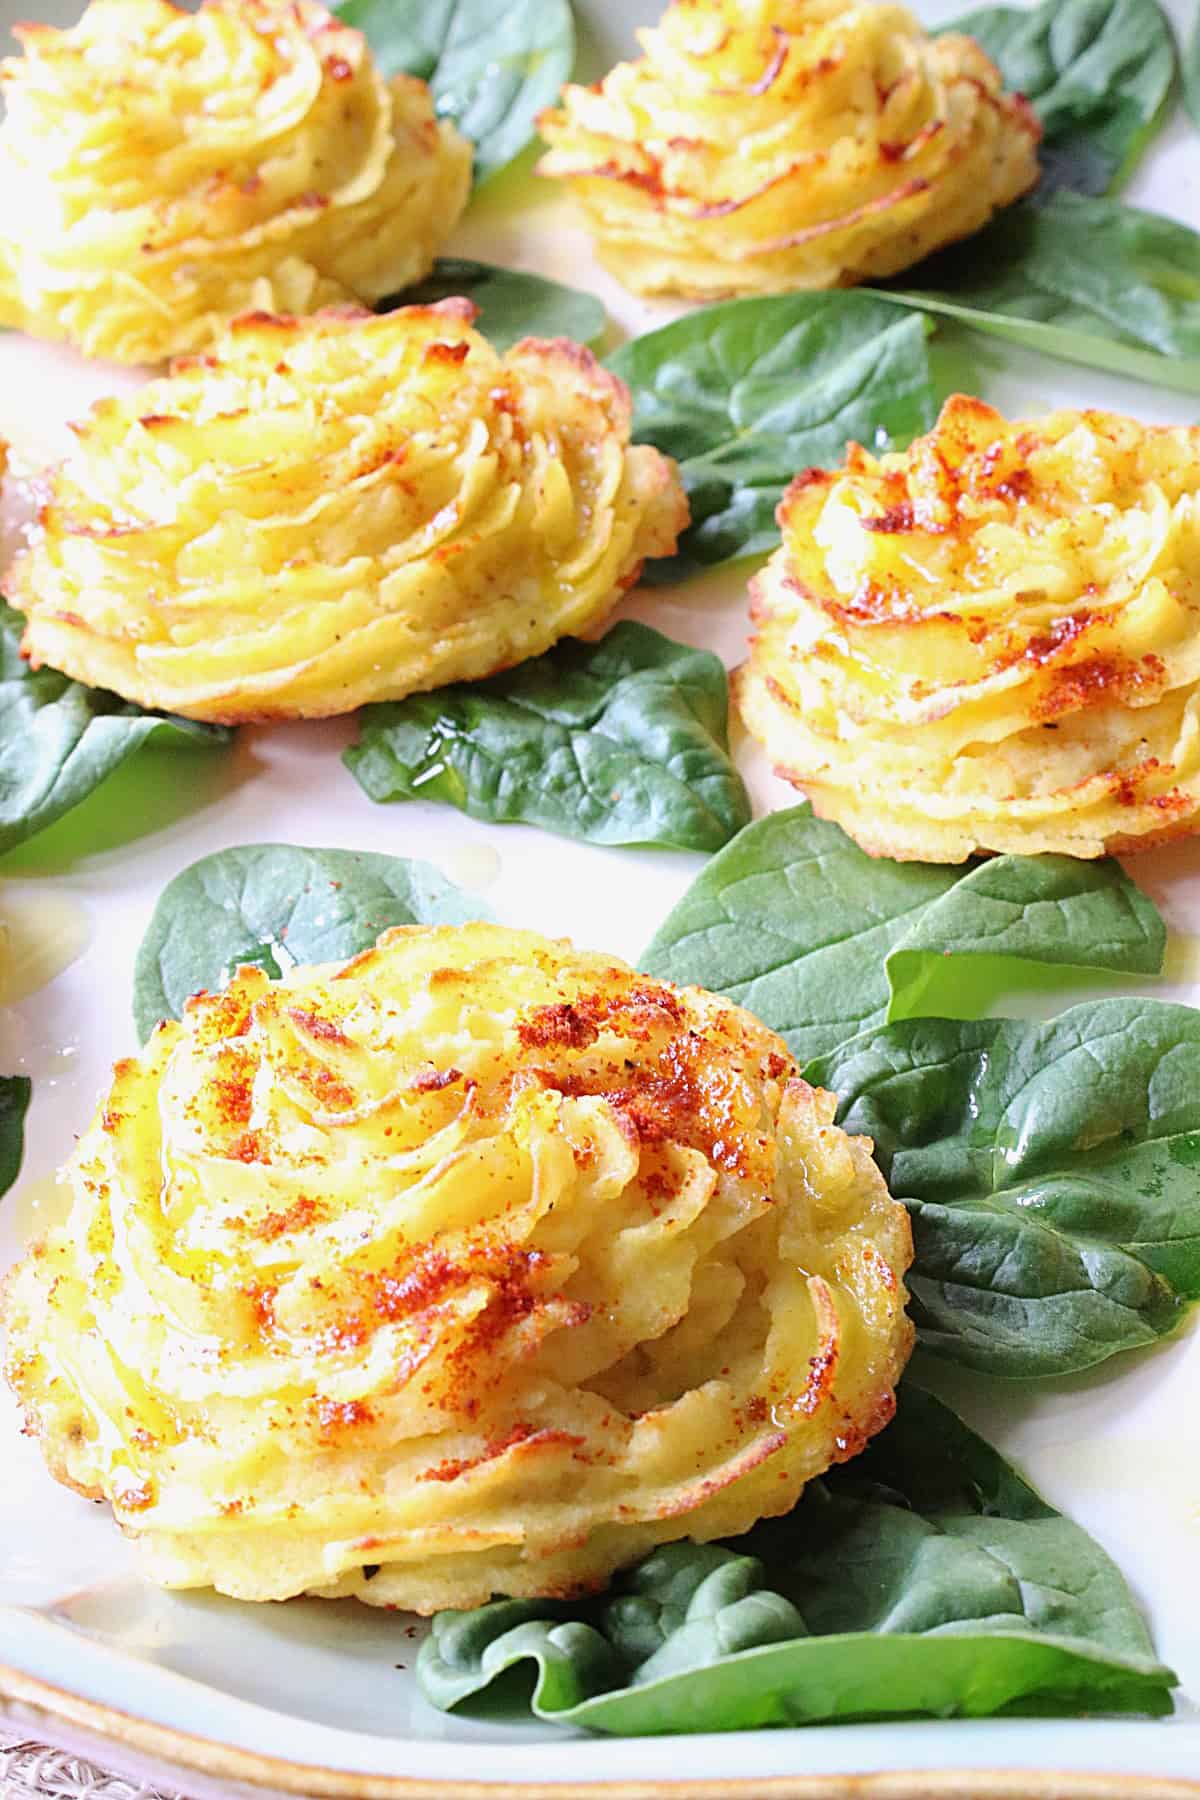 Golden yellow duchess potatoes with spinach leaves.